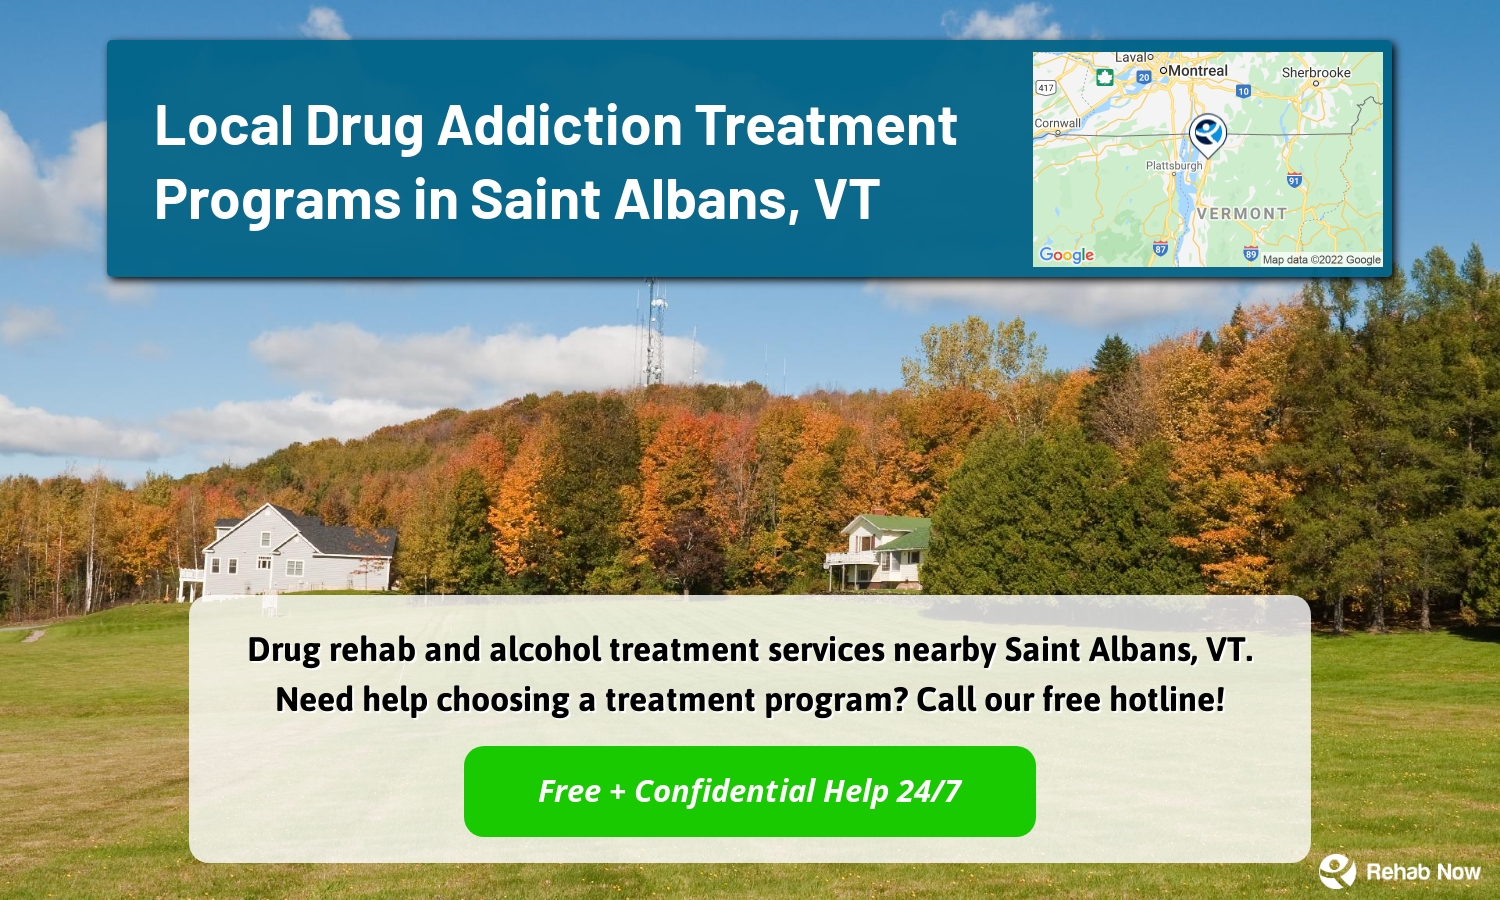 Drug rehab and alcohol treatment services nearby Saint Albans, VT. Need help choosing a treatment program? Call our free hotline!